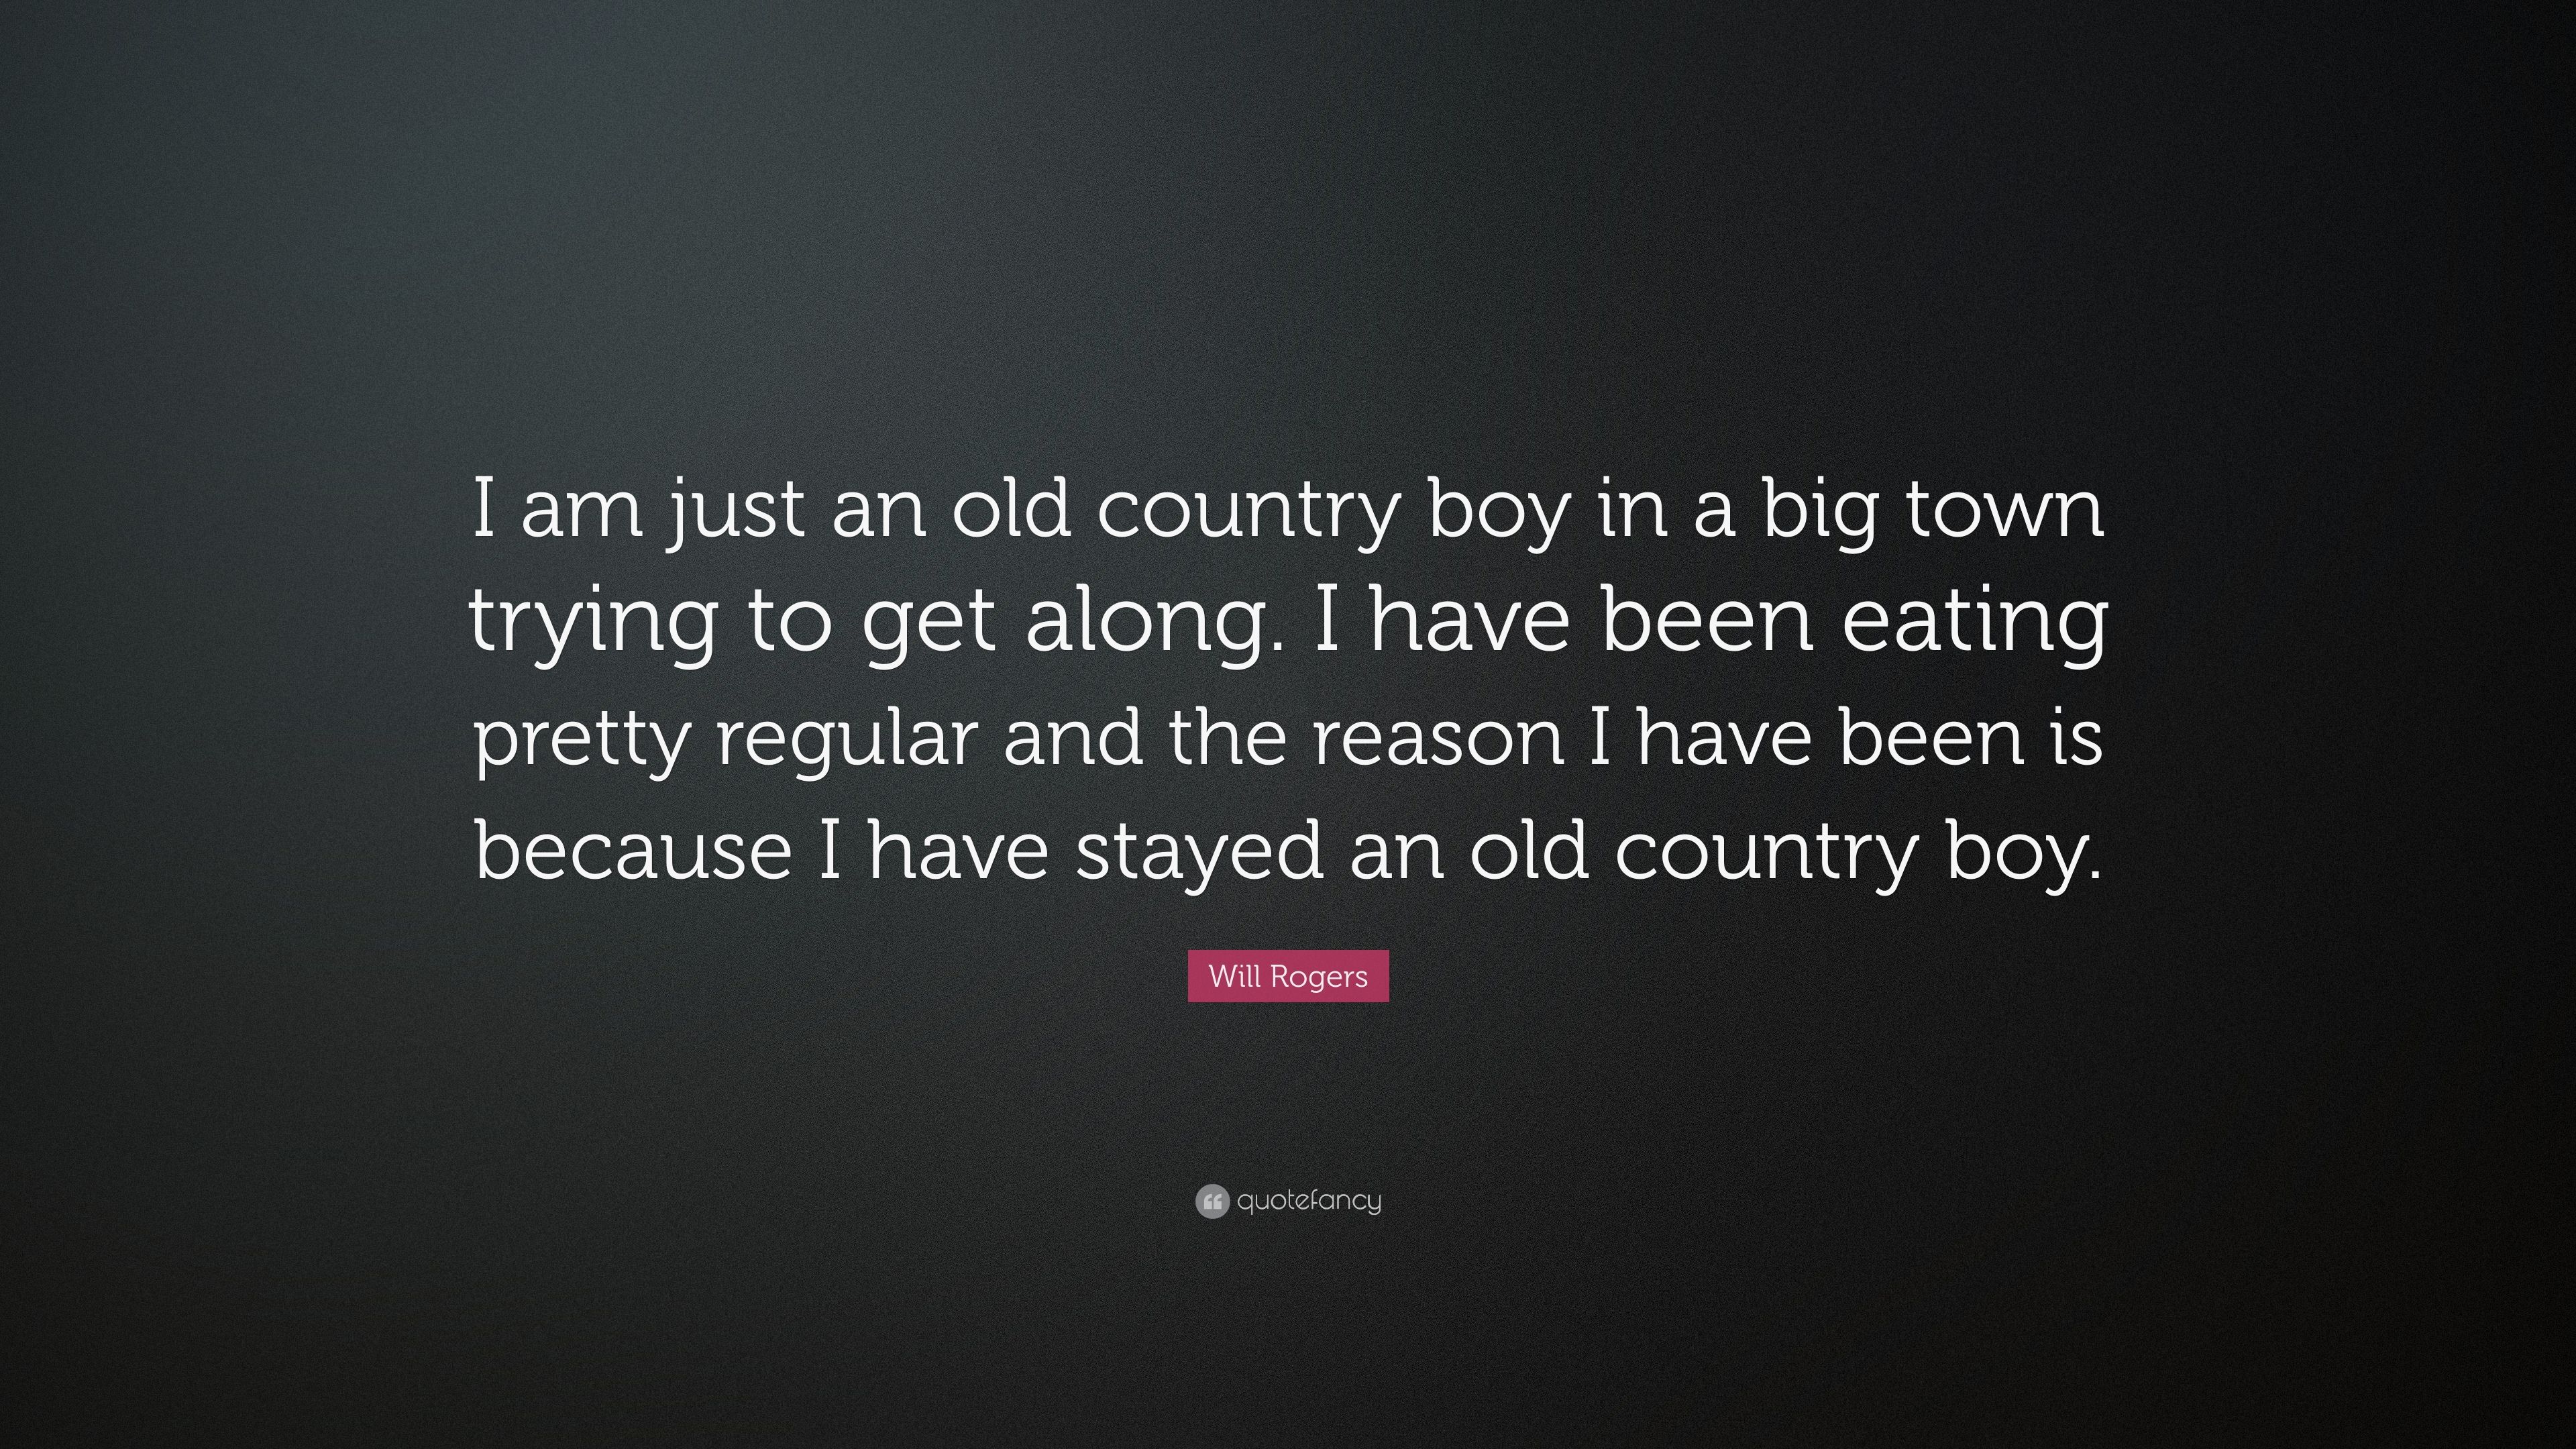 Will Rogers Quote: "I am just an old country boy in a big town.